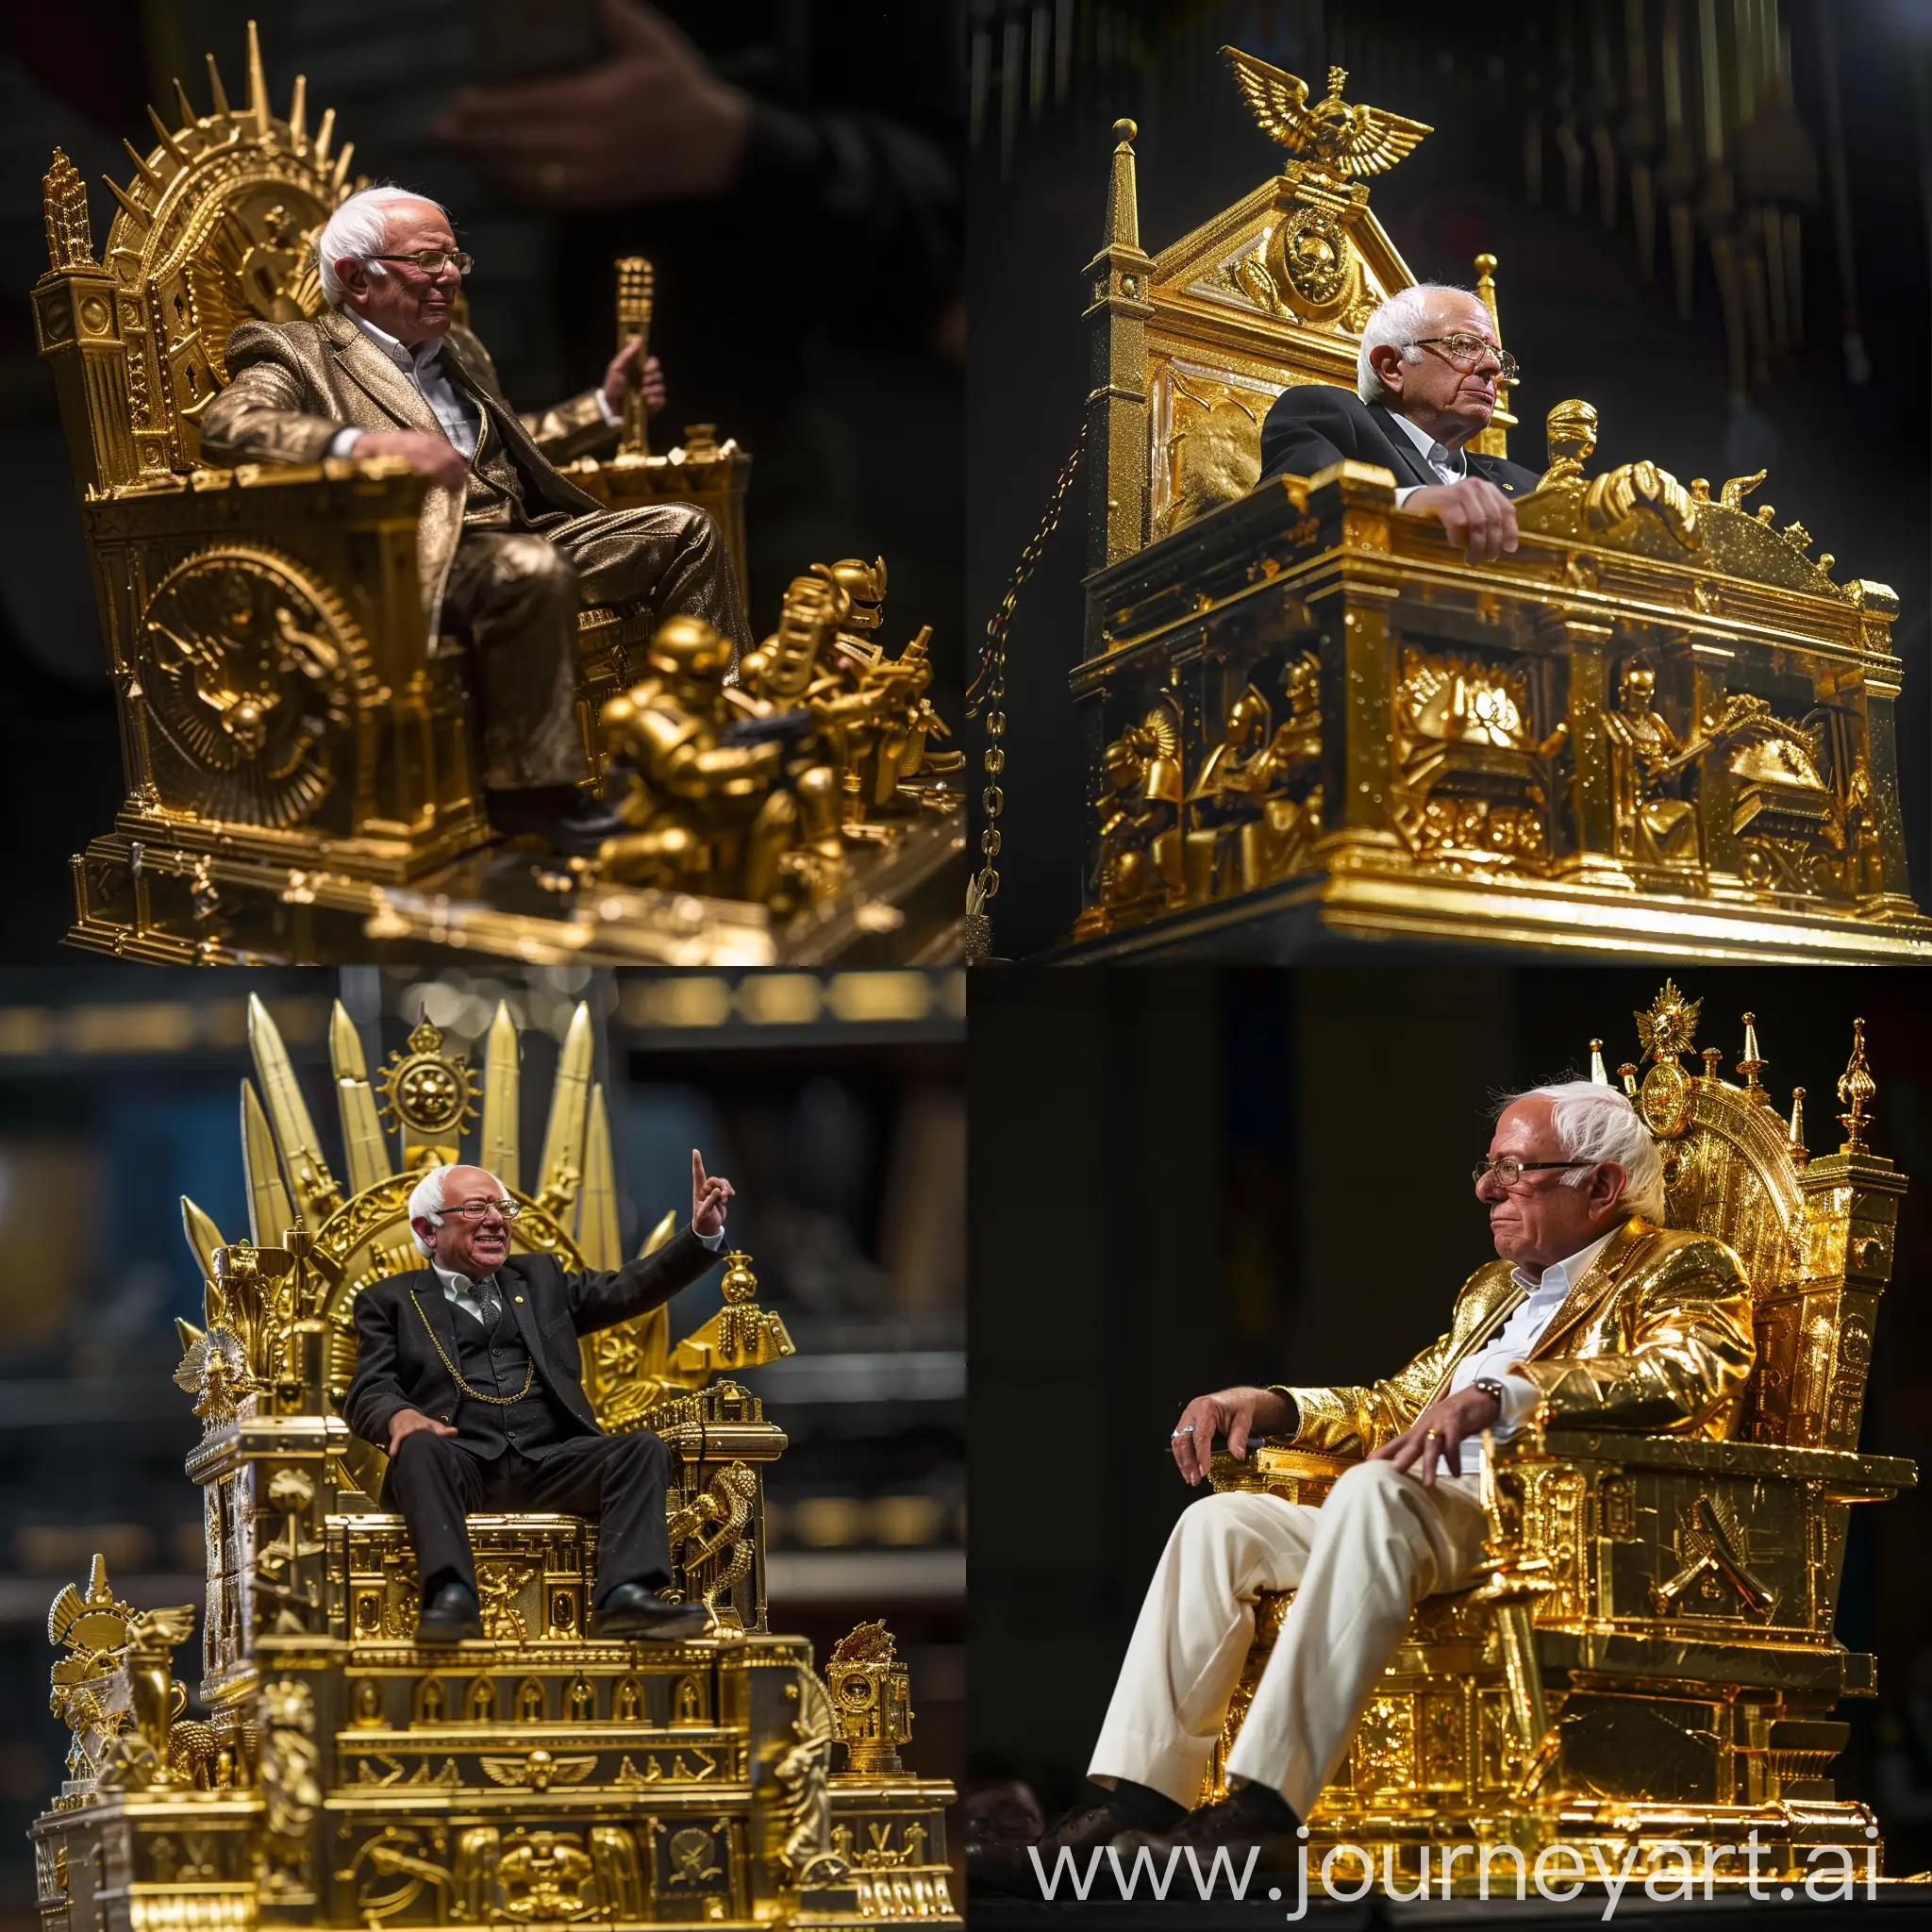 bernie sanders on the emperor's golden throne from warhammer 40k, in the style of the original 40k golden throne